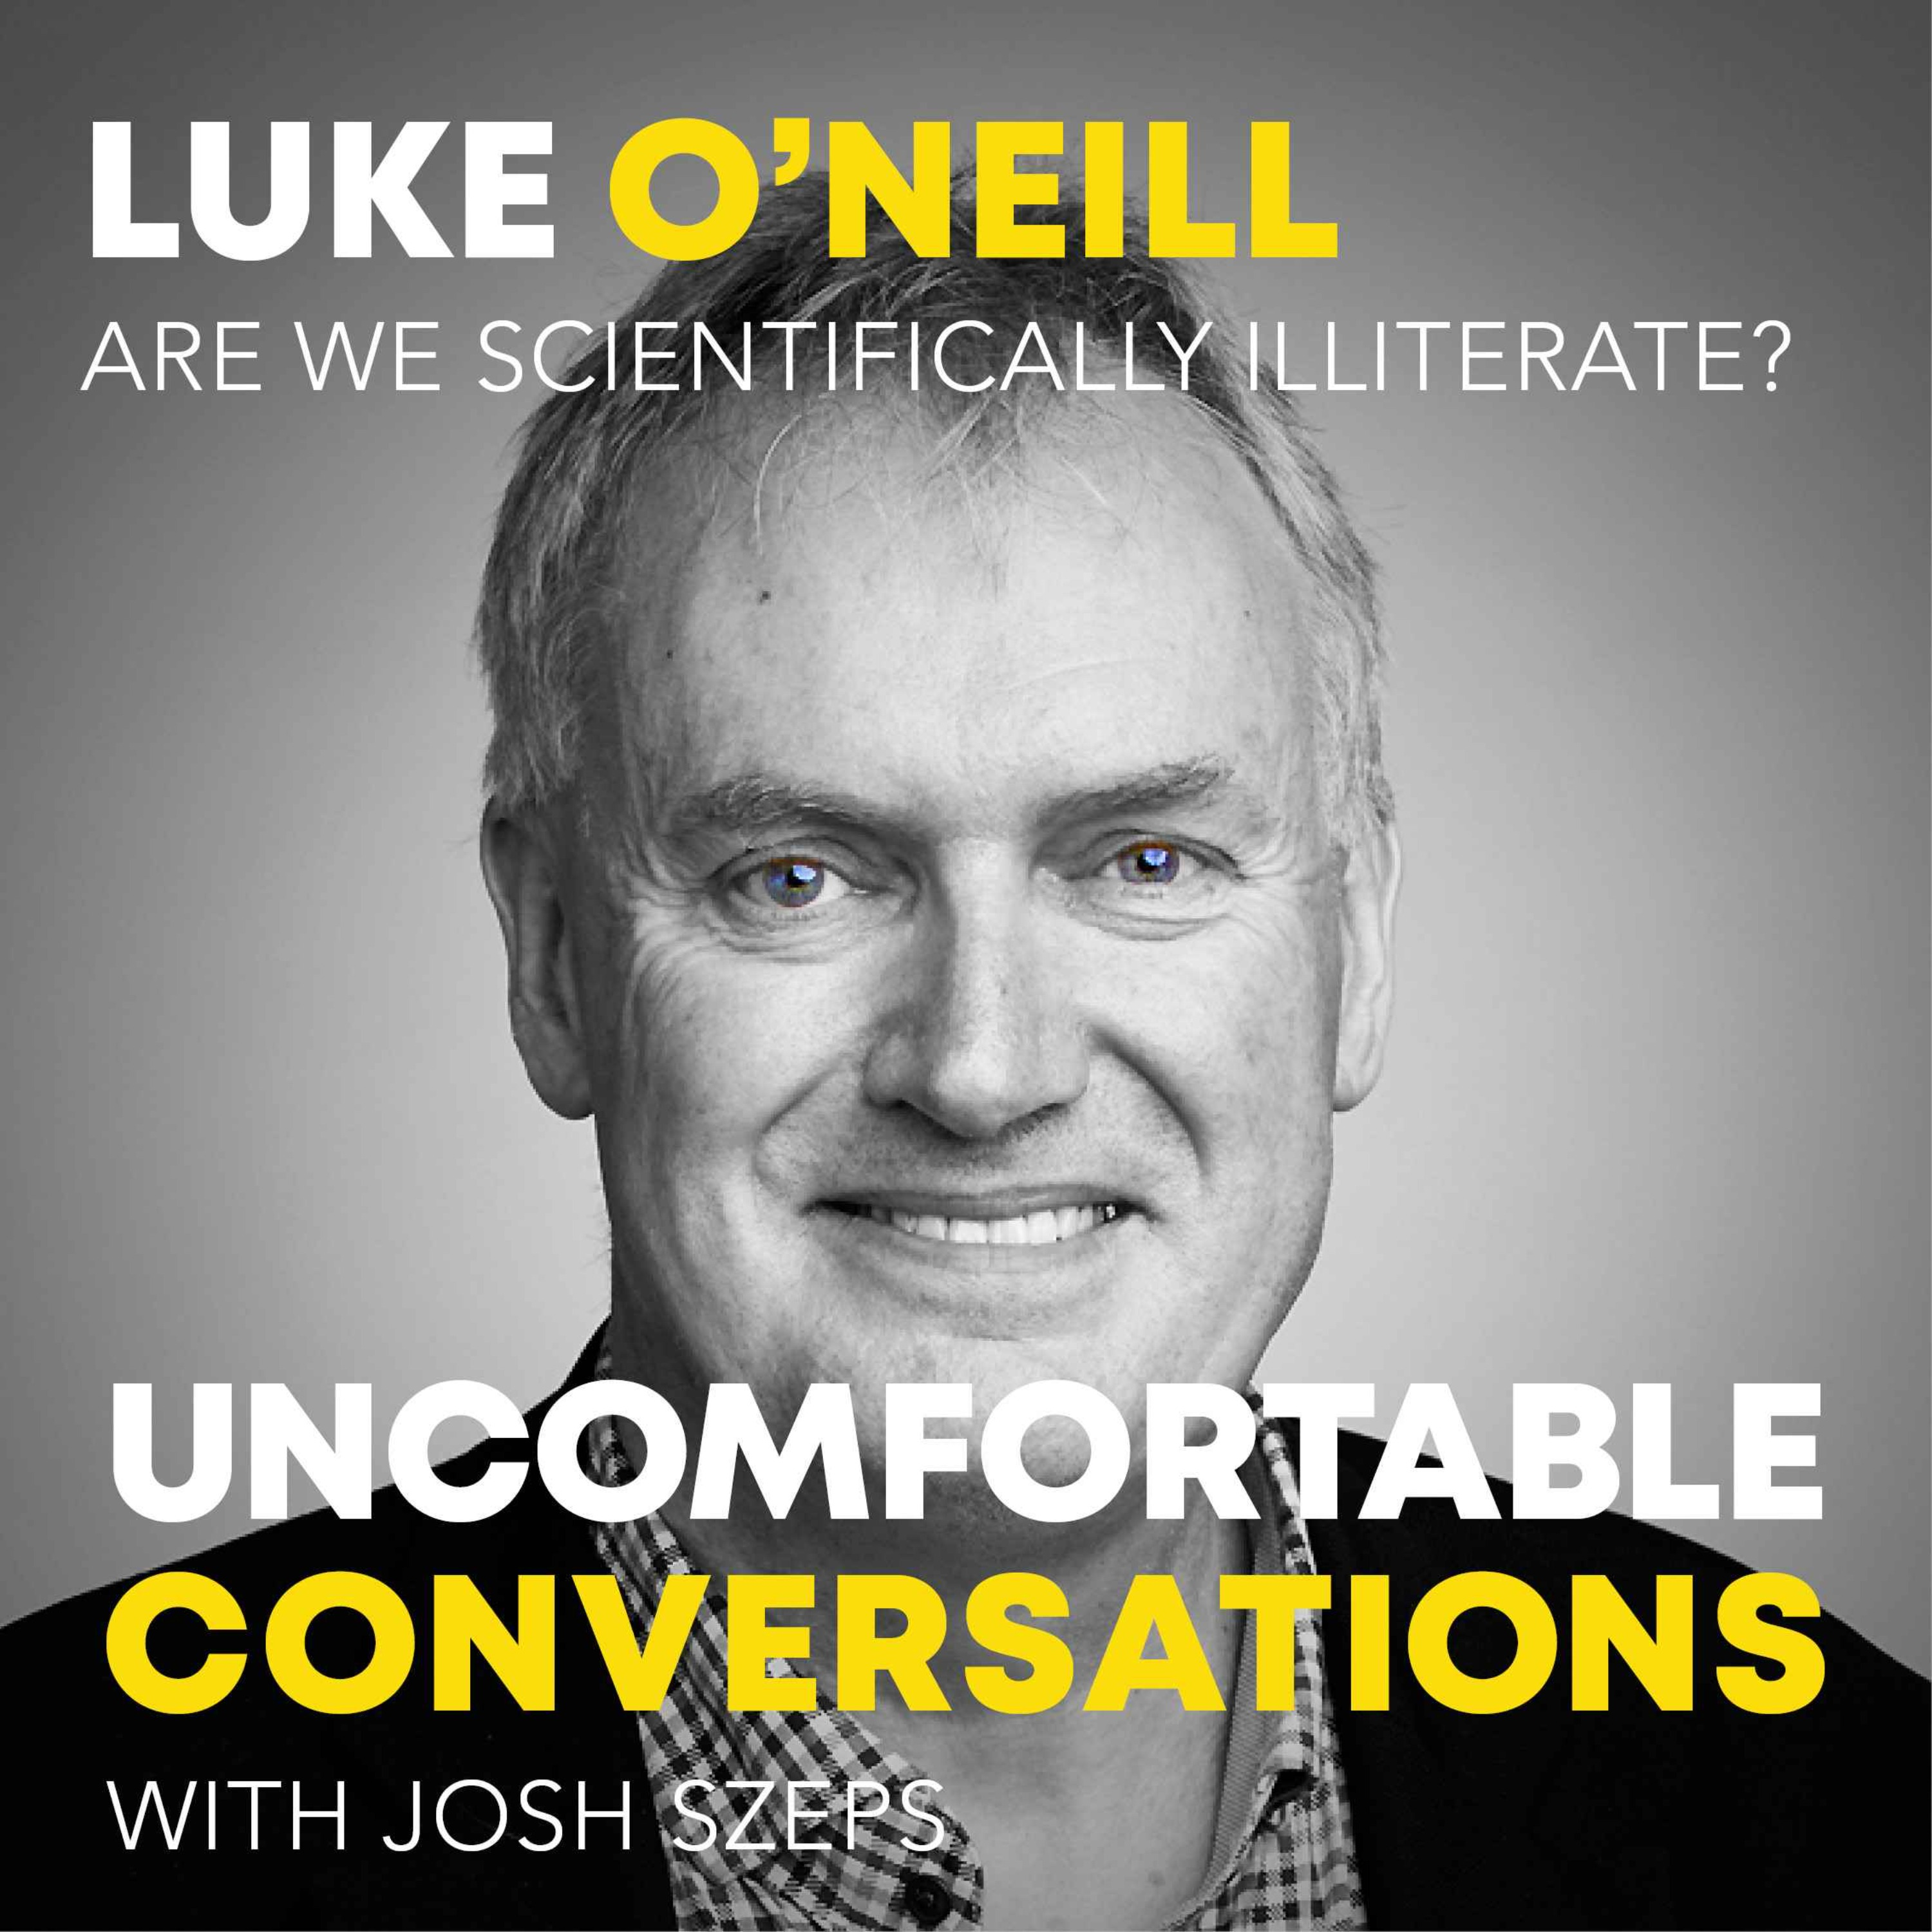 "Are We Scientifically Illiterate?" with Prof. Luke O'Neill